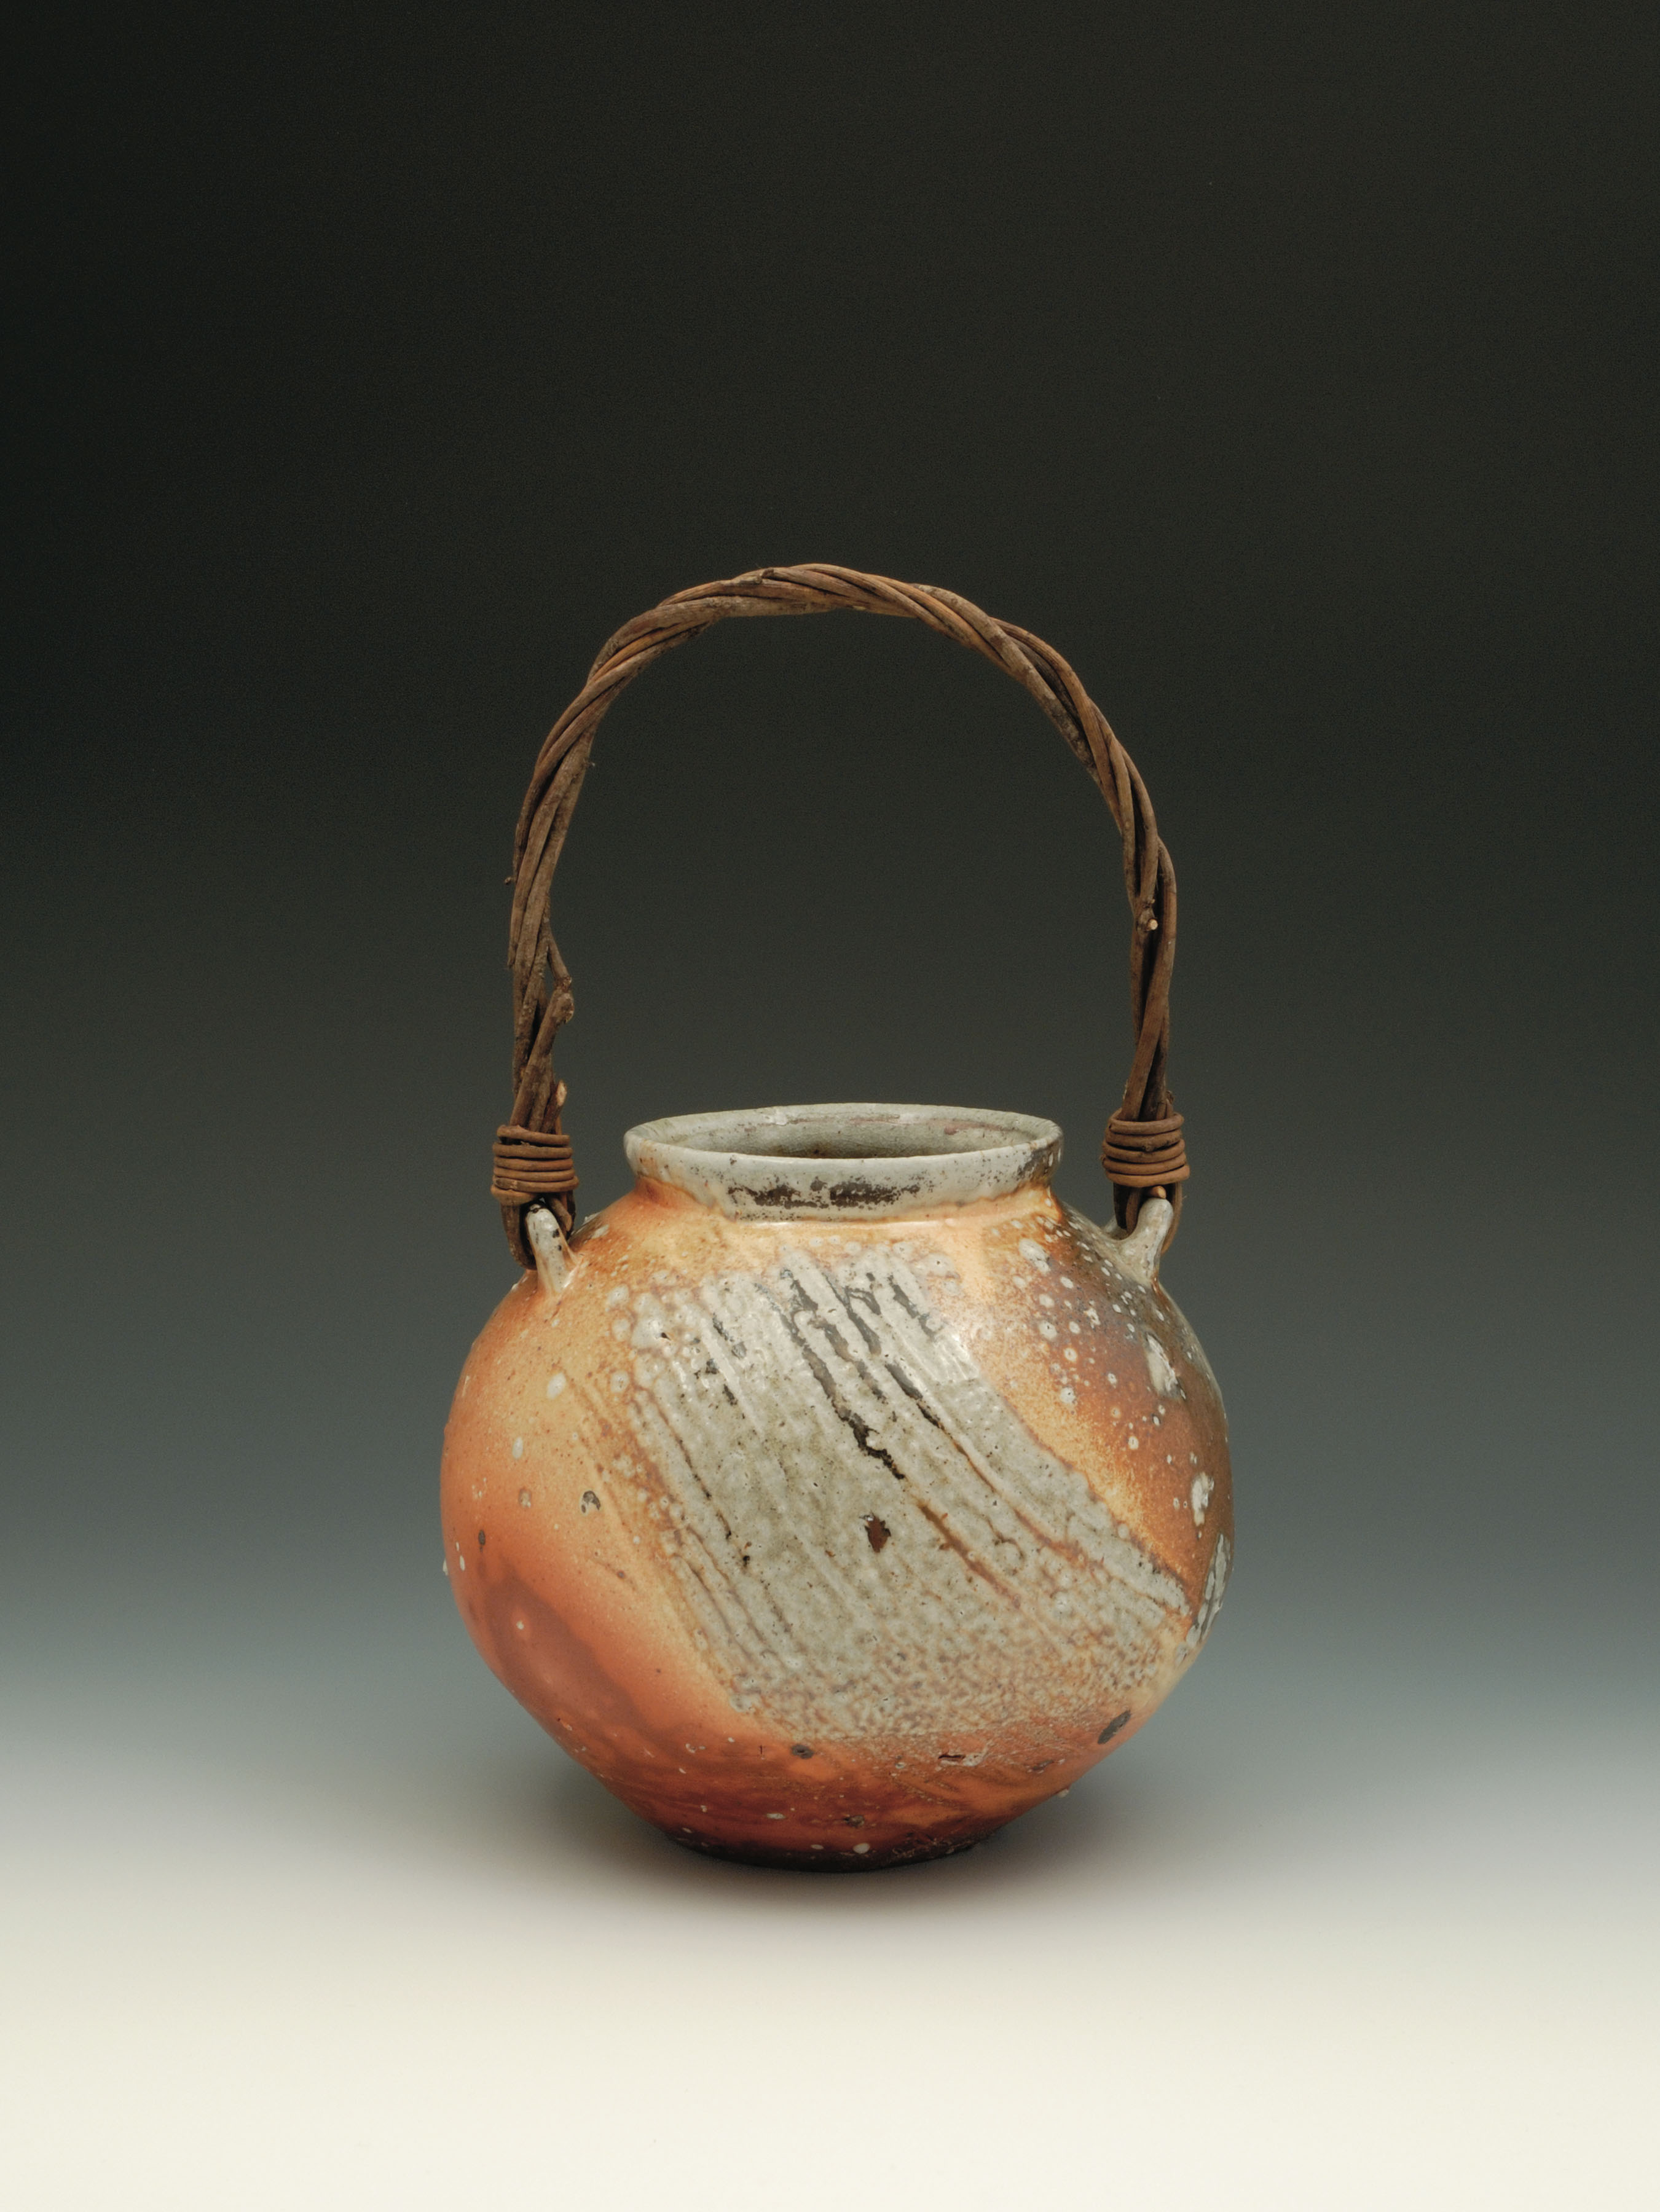 Round jar, 15 in. (38 cm) in height, thrown stoneware with wisteria handle by Lee Dalby, soda glaze, fired to Cone 12.